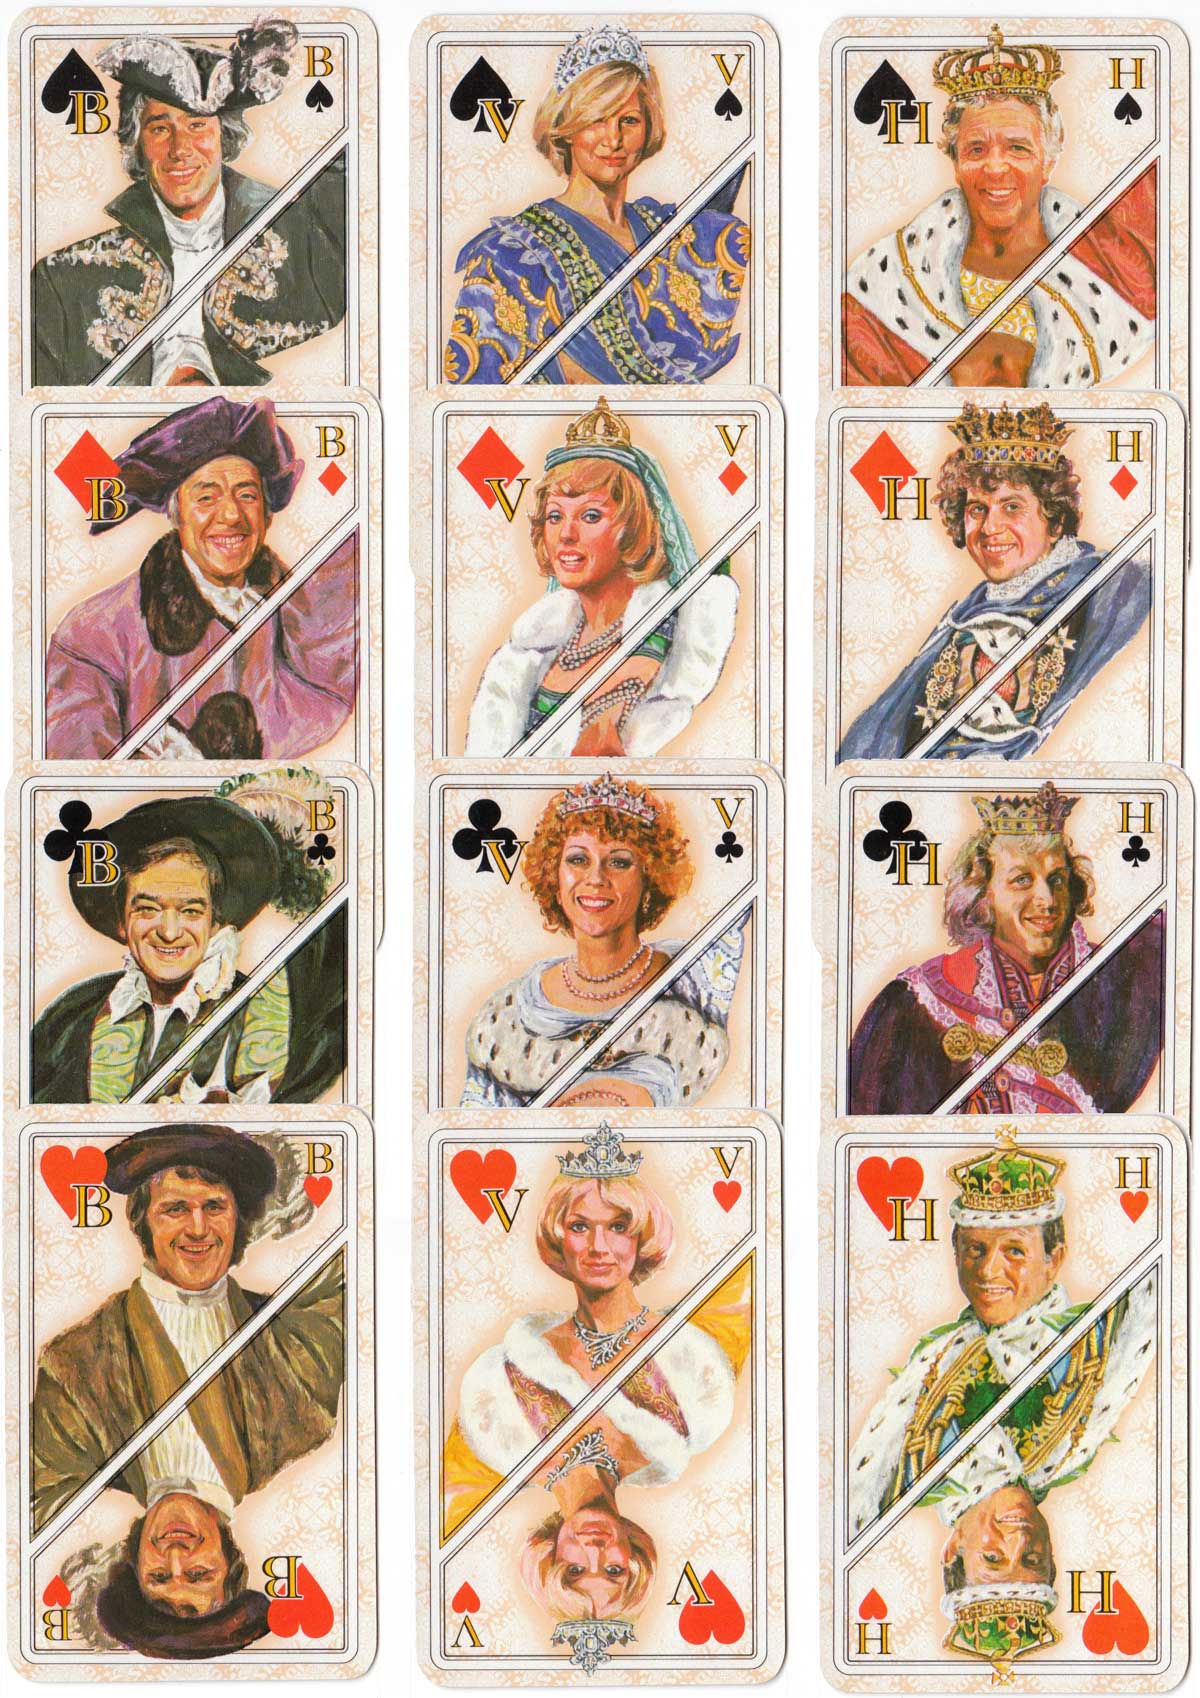 Dutch singers and theatre artist playing cards for “Story” magazine, 1978